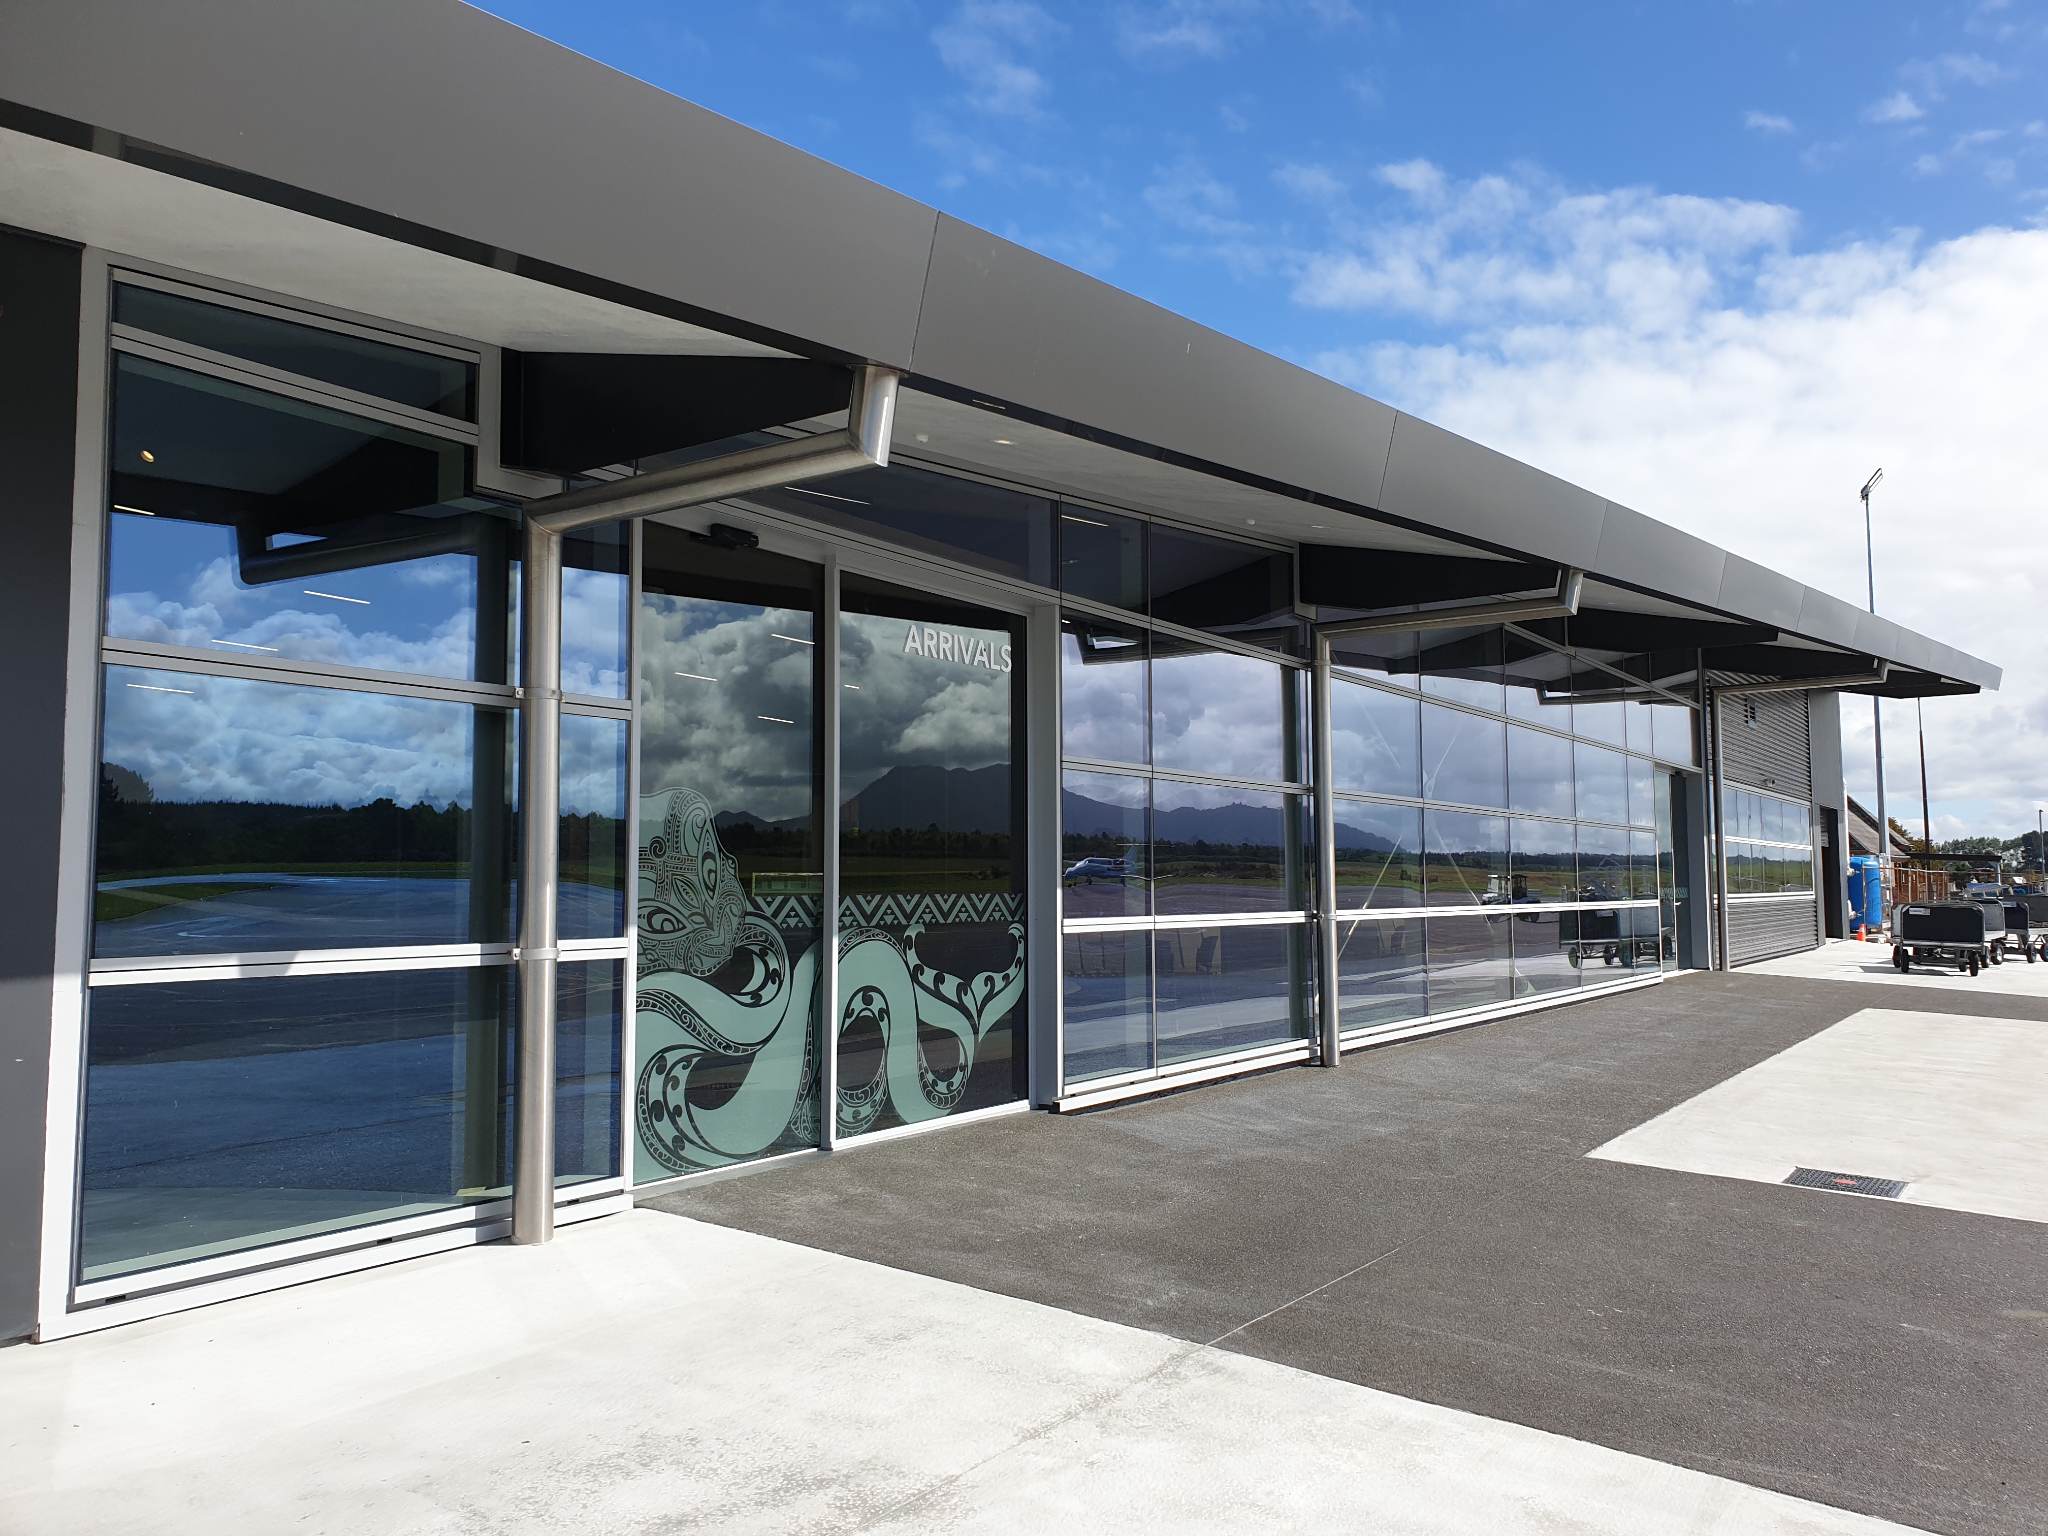 Taupo Airport Commercial Electrical Project - automatic doors and lighting